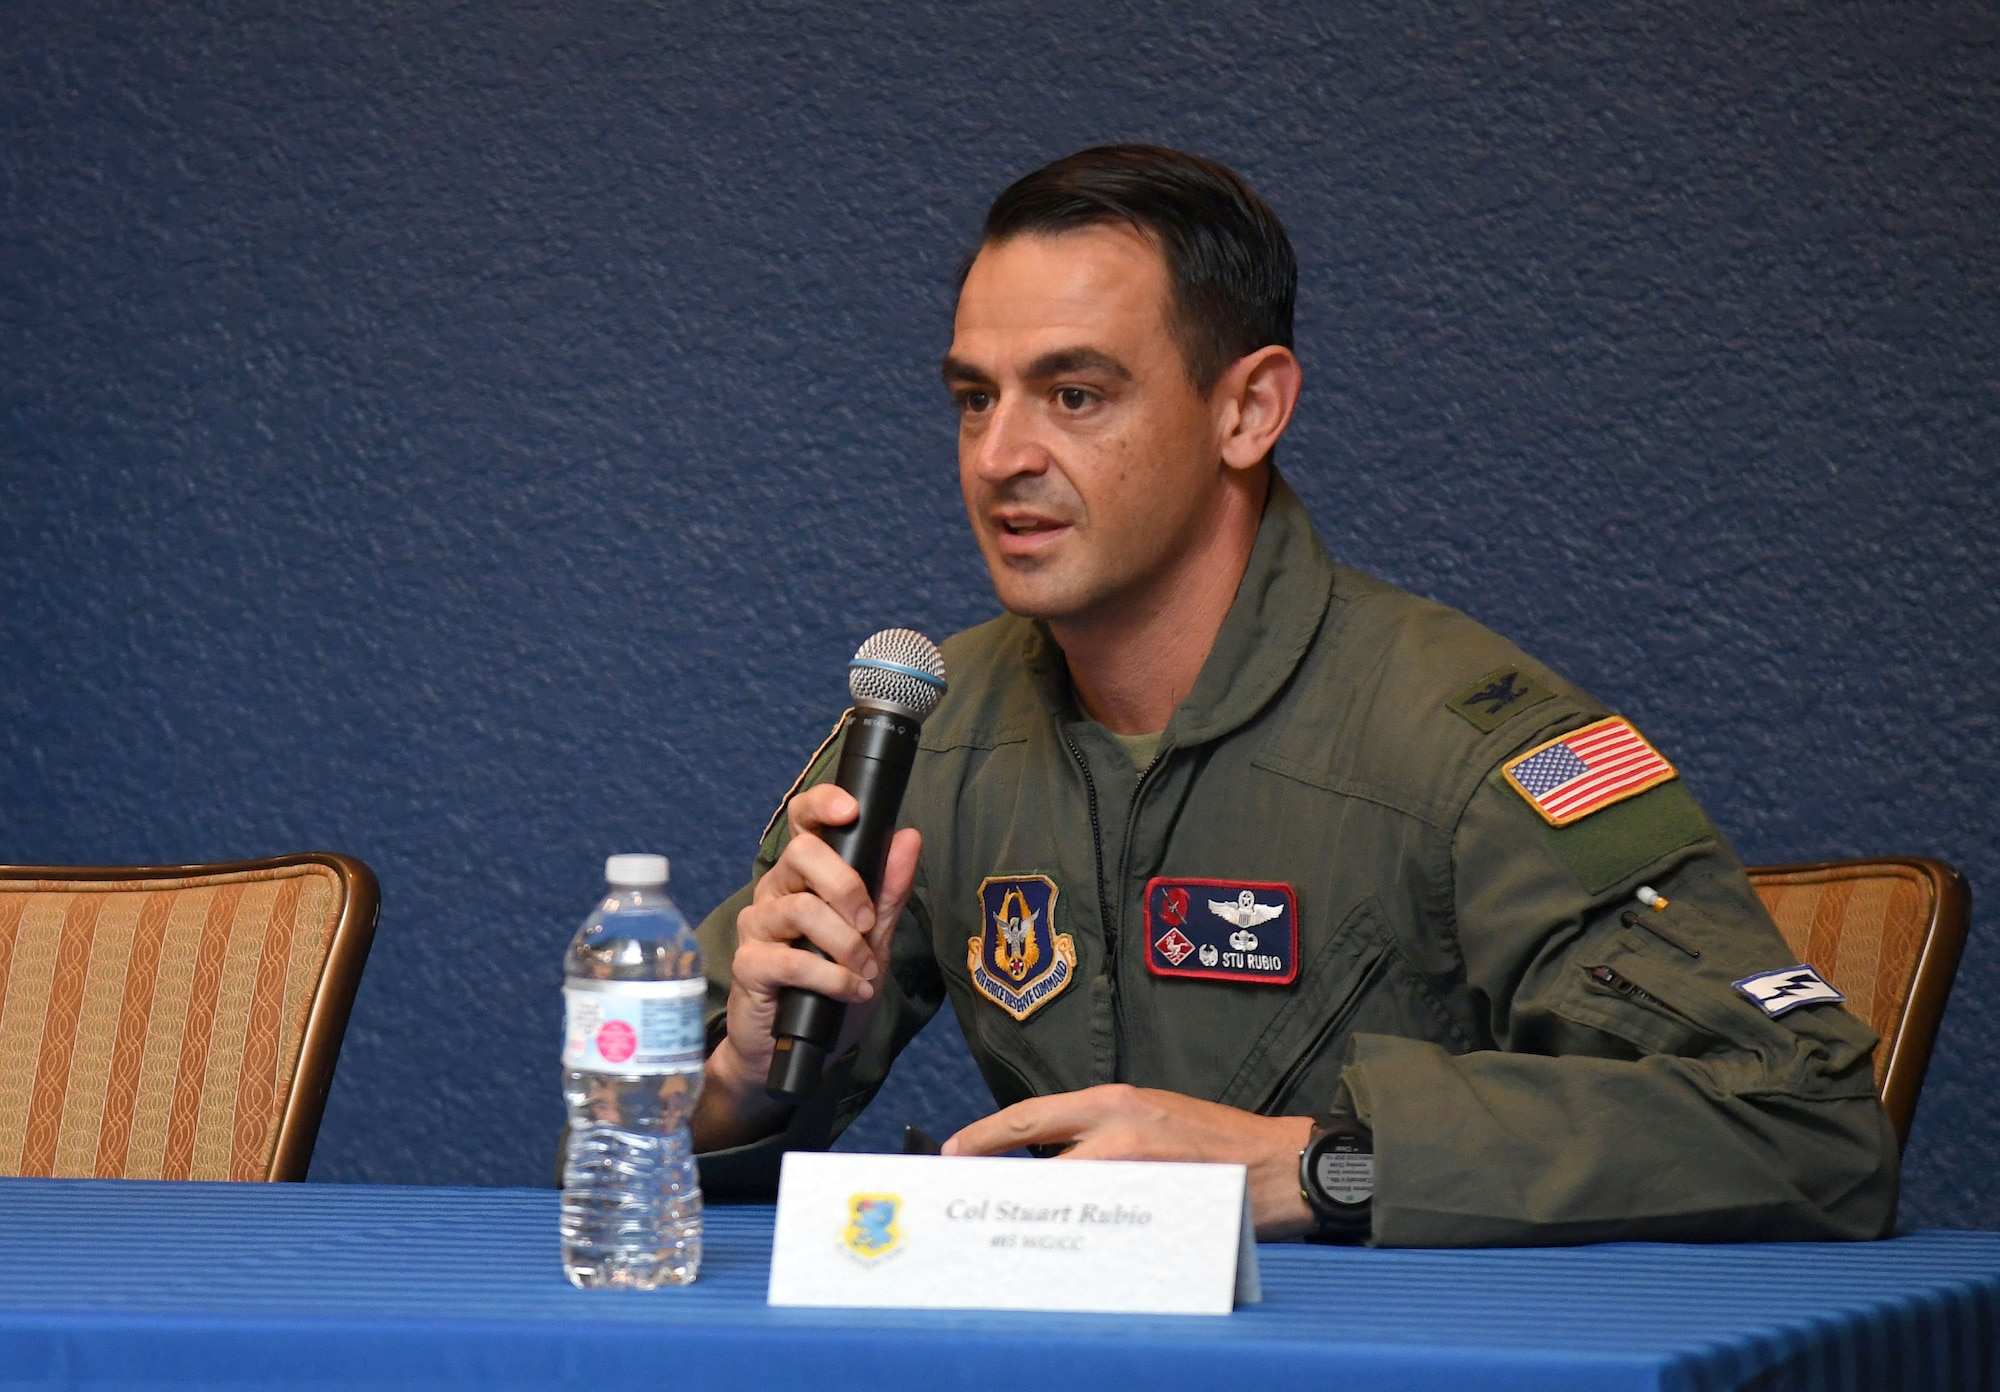 U.S. Air Force Col. Stuart Rubio, 403rd Wing commander, delivers remarks during the Hispanic Leaders Panel inside the Bay Breeze Event Center at Keesler Air Force Base, Mississippi, Oct. 5, 2021. During National Hispanic Heritage Month, which is celebrated from Sept. 15 to Oct. 15, Keesler will also host a 5K run. (U.S. Air Force photo by Kemberly Groue)